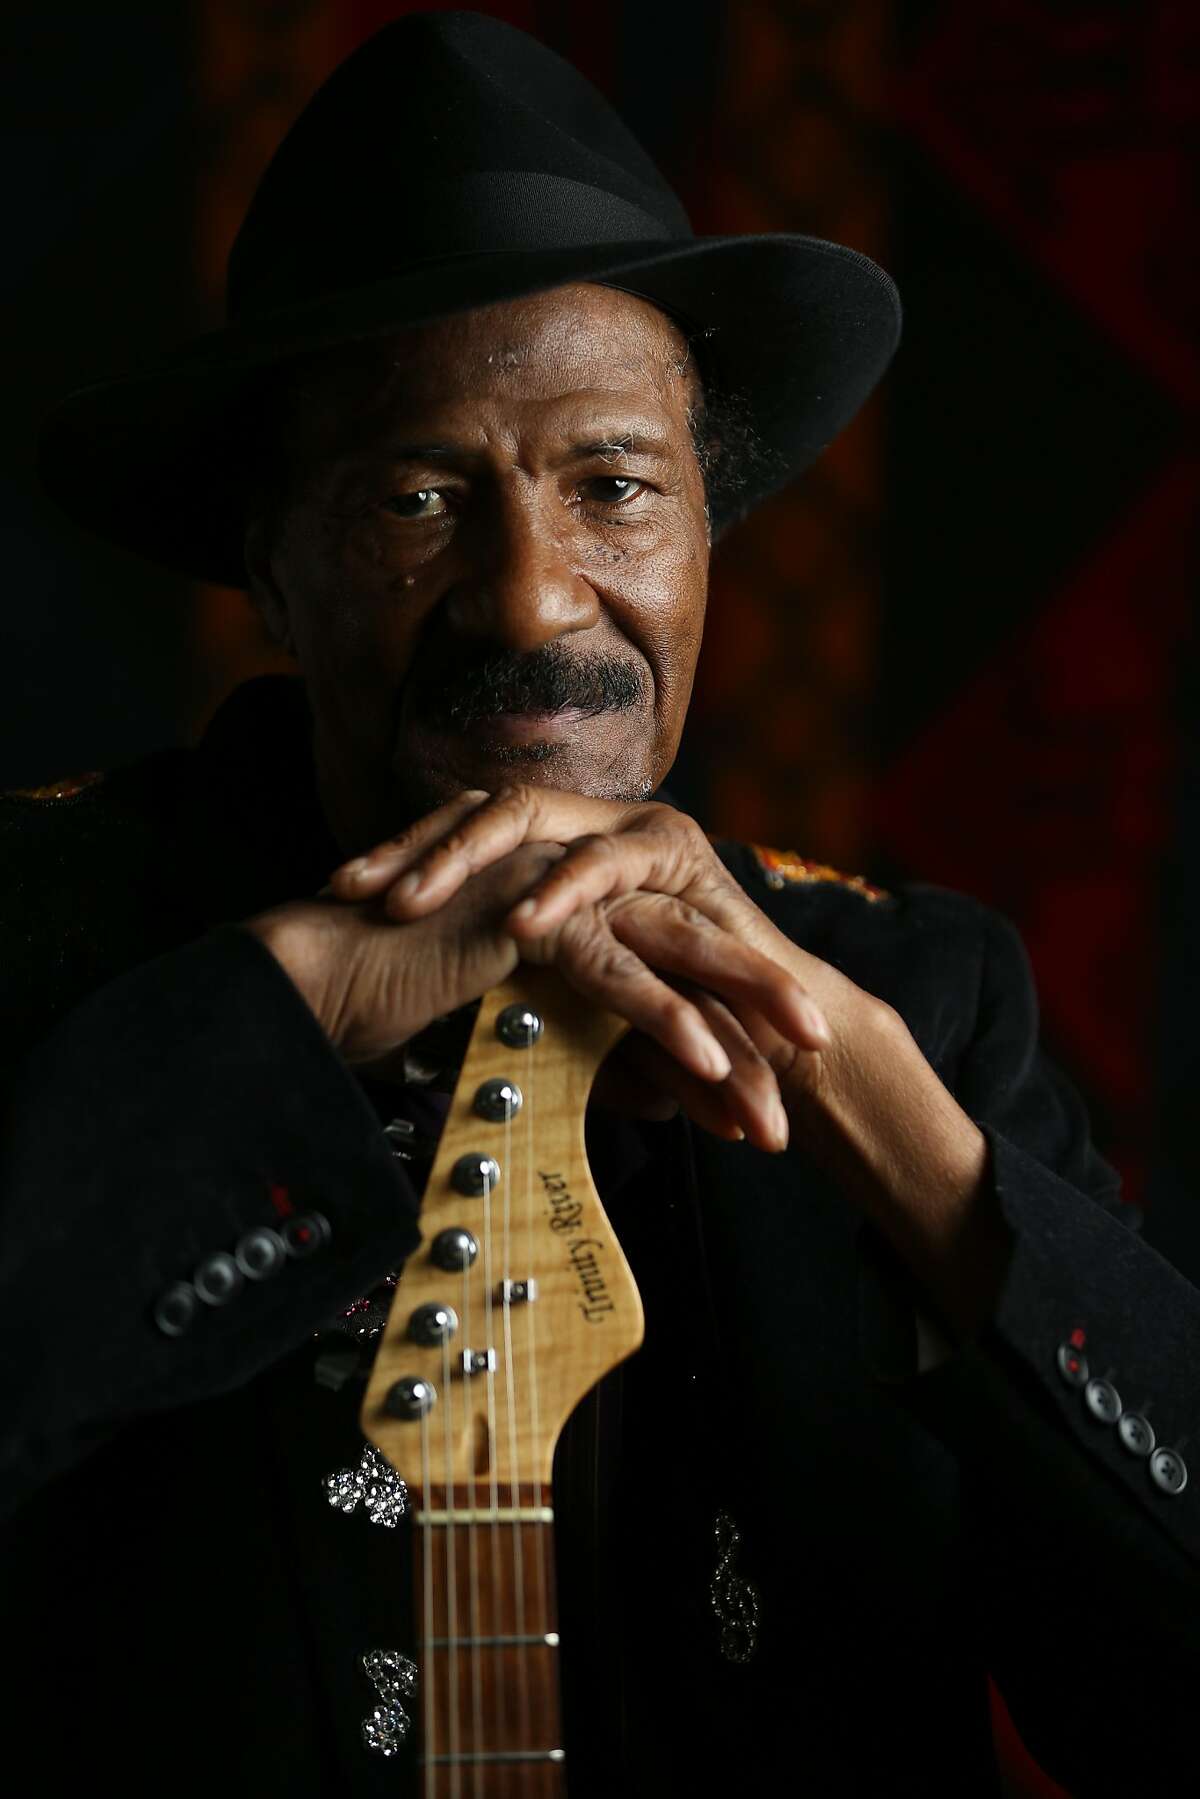 Clarence Sims, known by his stage name Fillmore Slim, sits for a portrait on Wednesday, Feb. 8, 2017, in Redwood City, Calif. He is a Blues vocalist and guitarist performing Feb. 24 and Feb. 25 at Eli's Mile High Club in Oakland, where he recorded his first album, Born to Sing the Blues.